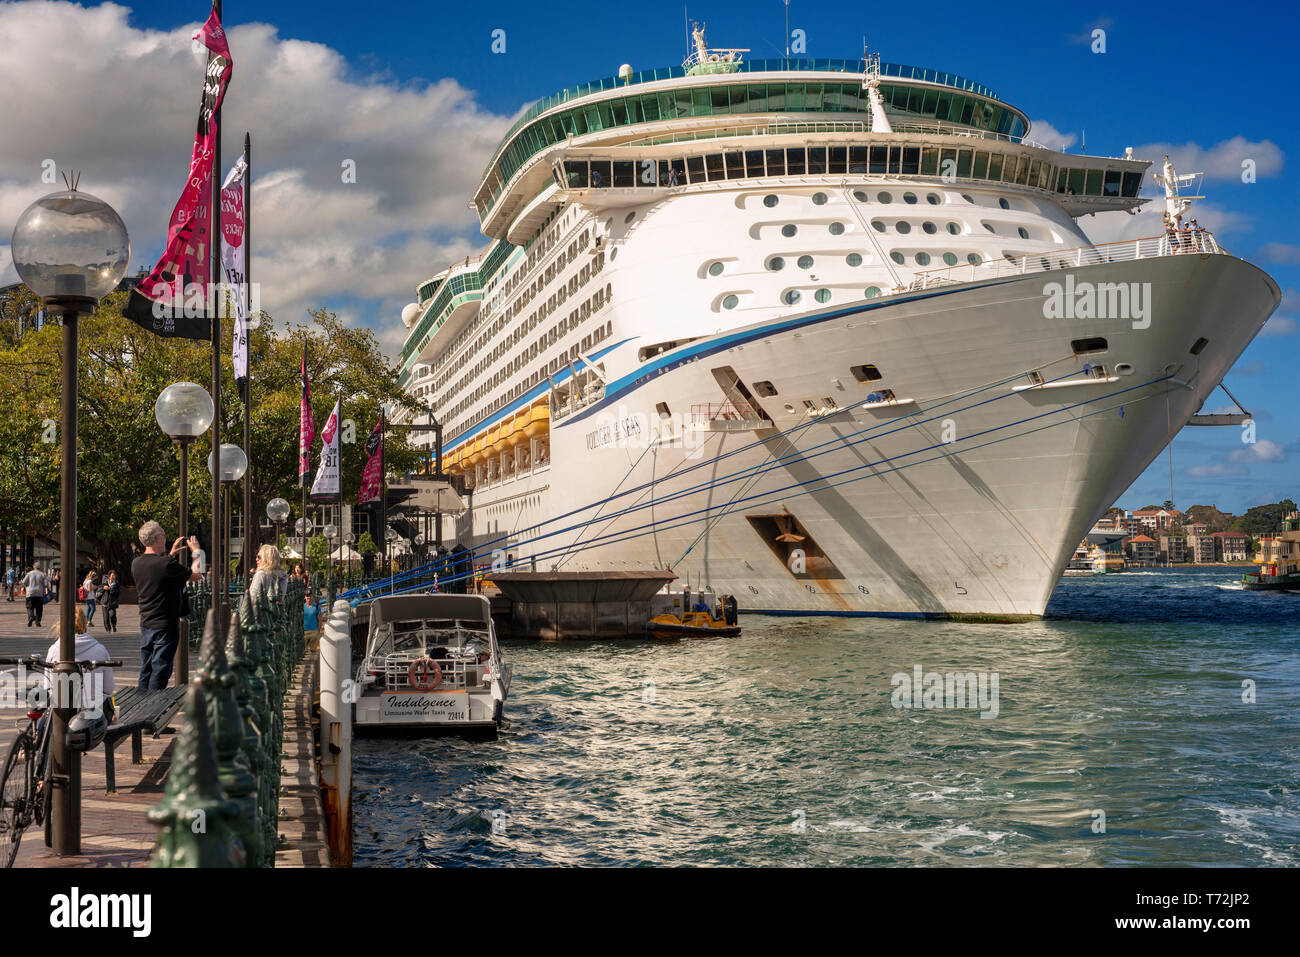 Voyager of the seas Cruise ship at the International Terminal in Sydney, Australia Stock Photo